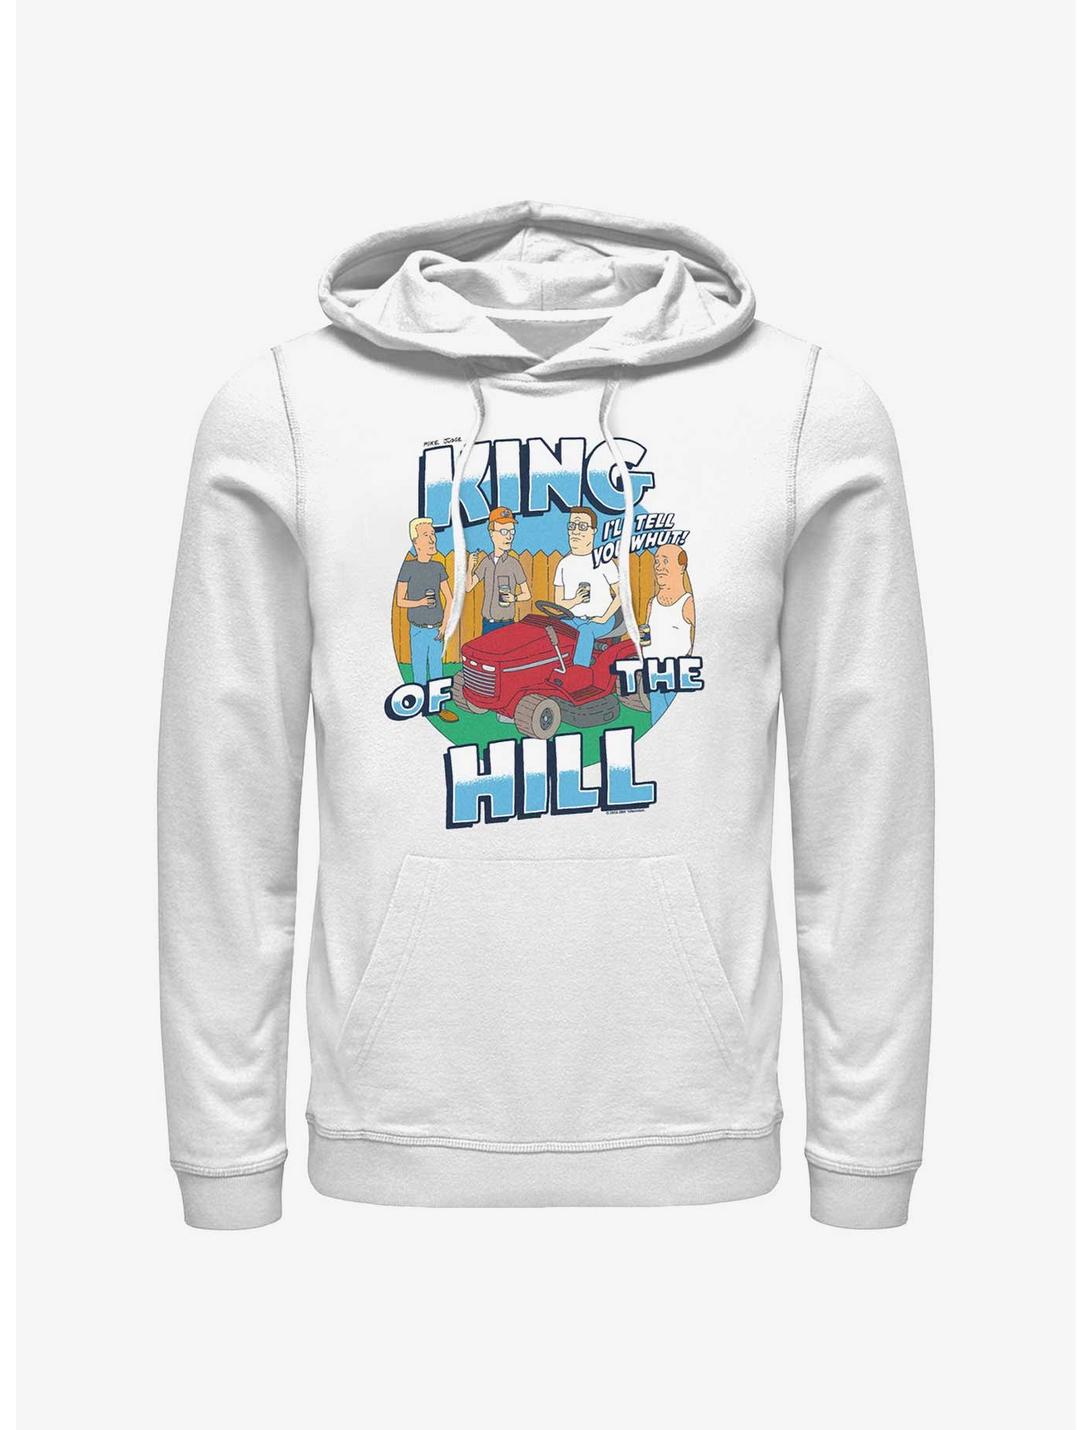 King of the Hill Whut Hoodie, WHITE, hi-res